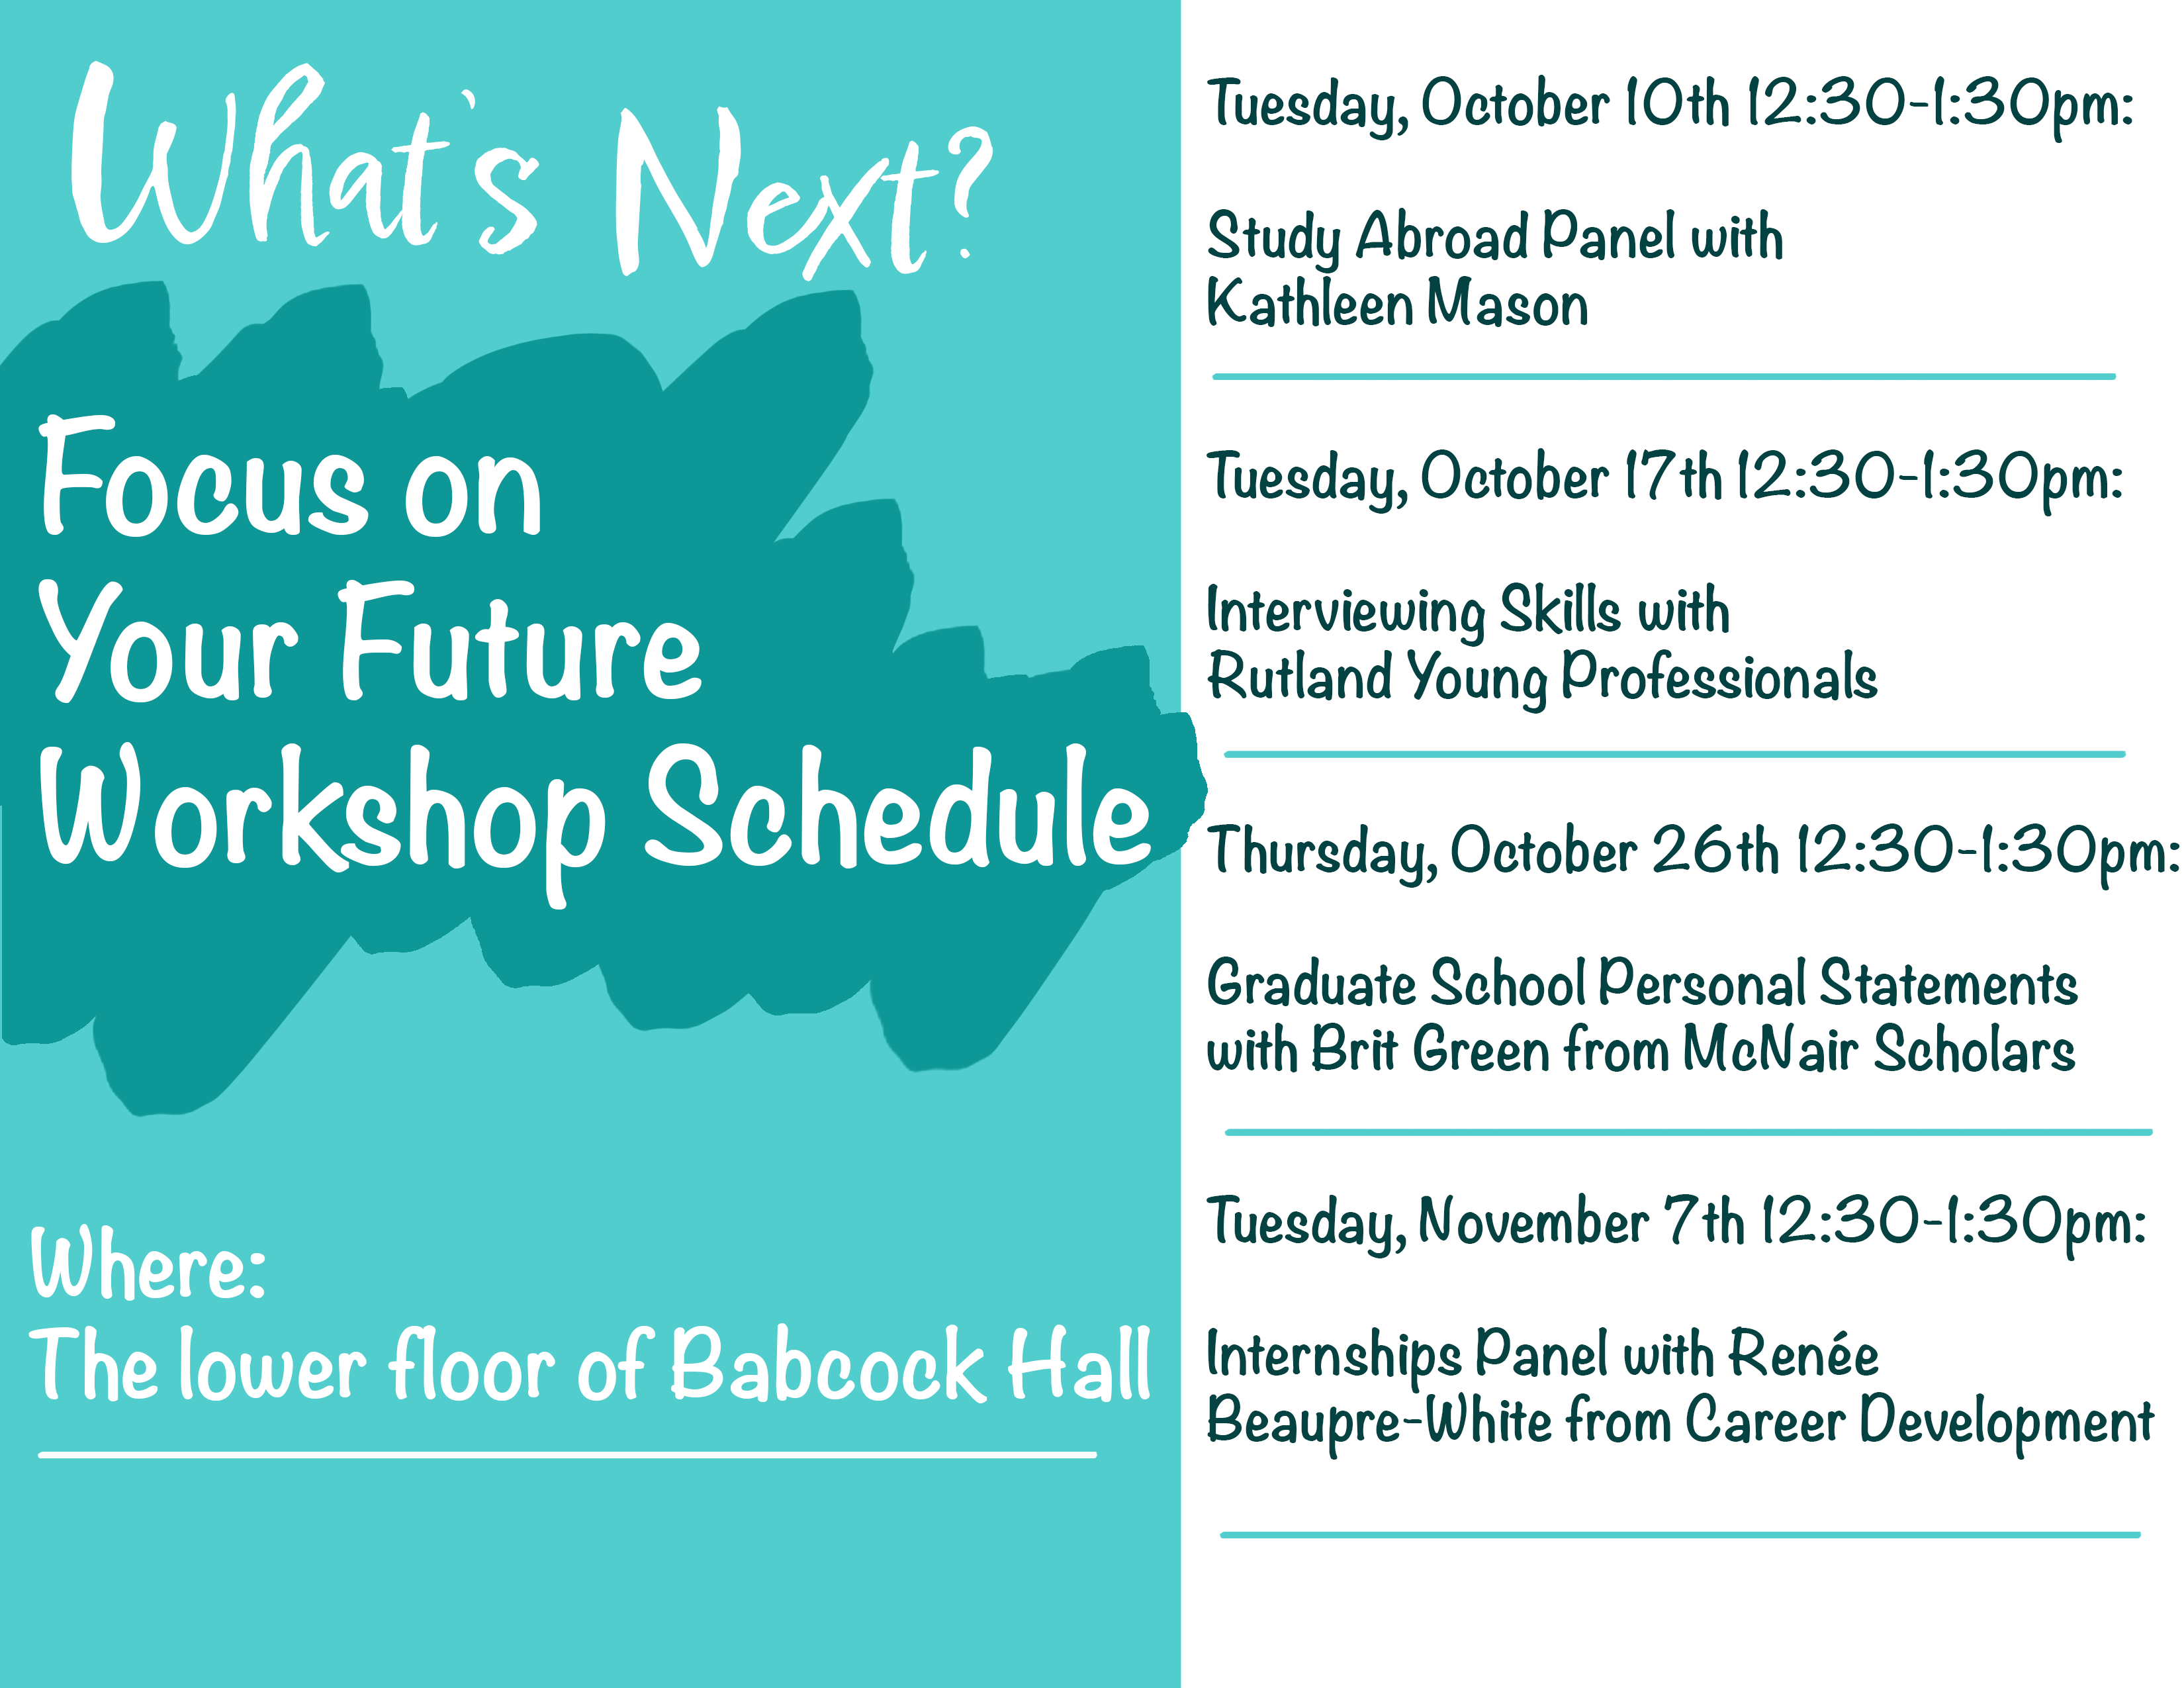 What’s Next? Focus on Your Future Workshops!